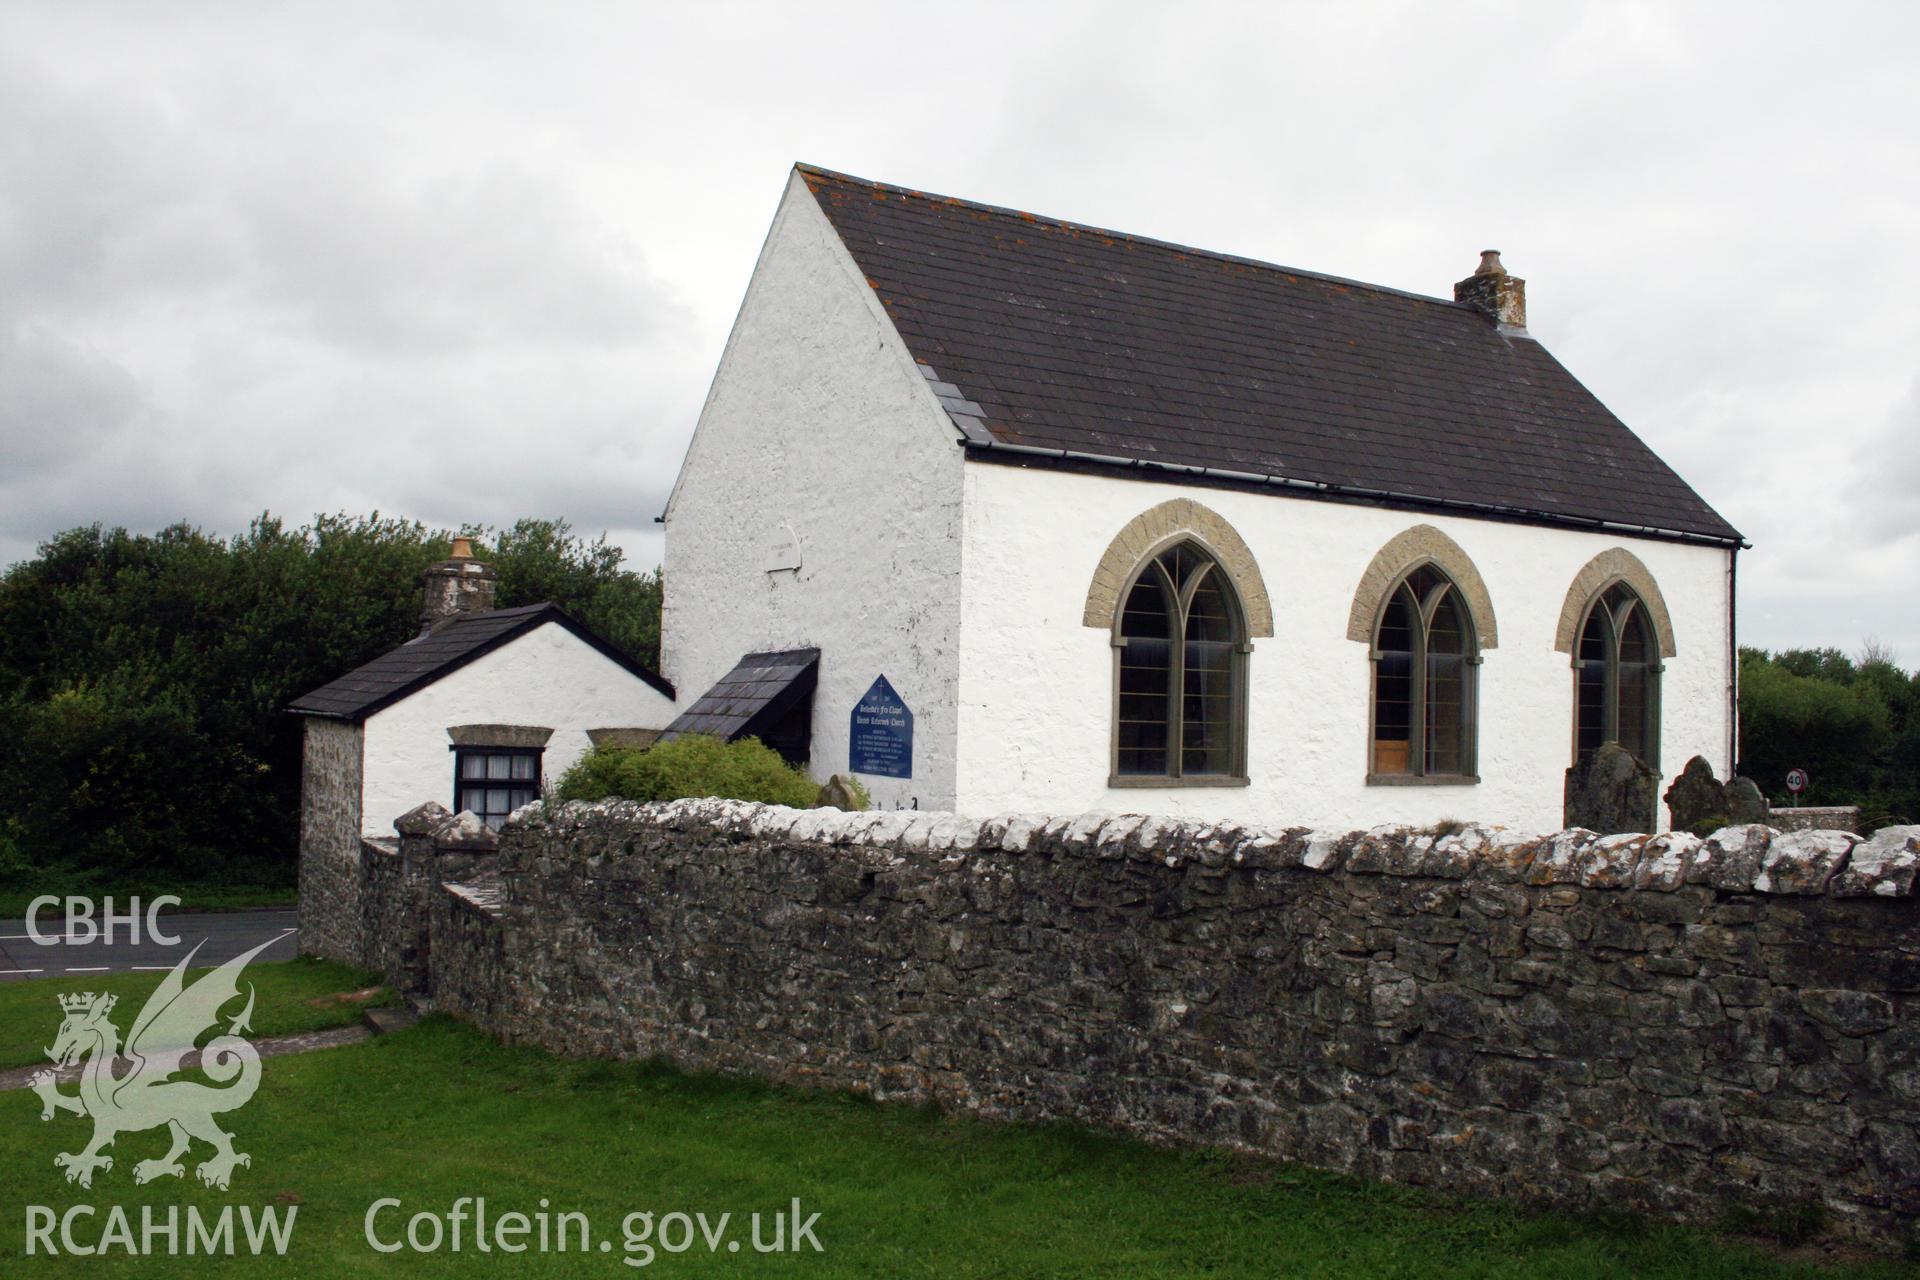 Bethesda Independent chapel, Boverton, exterior viewed from the south-west